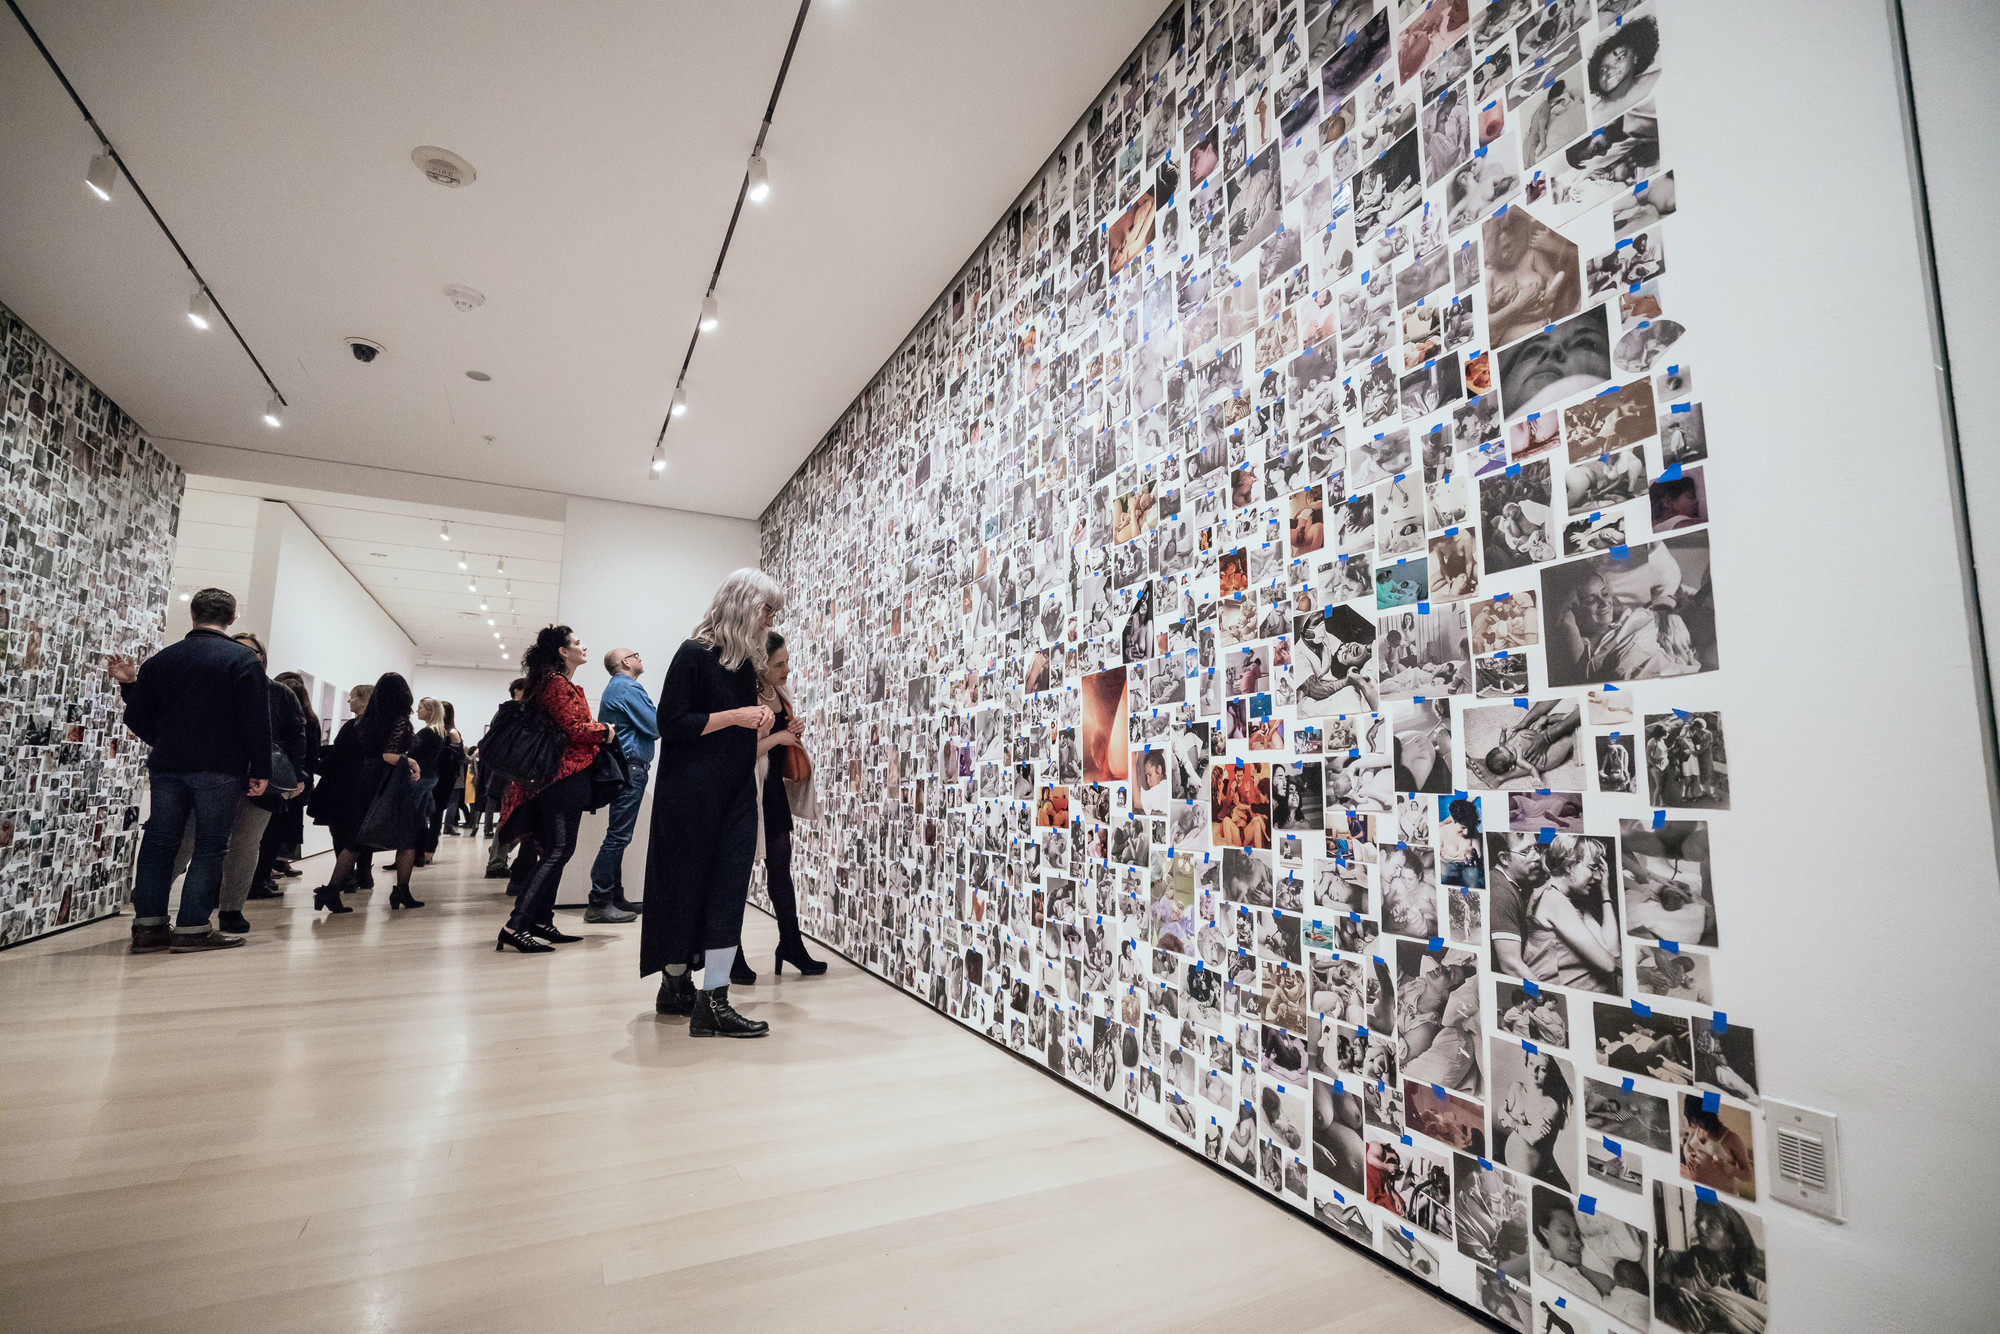 Installation view of Being: New Photography 2018 at The Museum of Modern Art, New York, March 18, 2018–August 19, 2018. Shown: Carmen Winant. My Birth. 2018. Found images, tape. The Museum of Modern Art, New York. © 2018 Carmen Winant. Photo: Austin Donohue